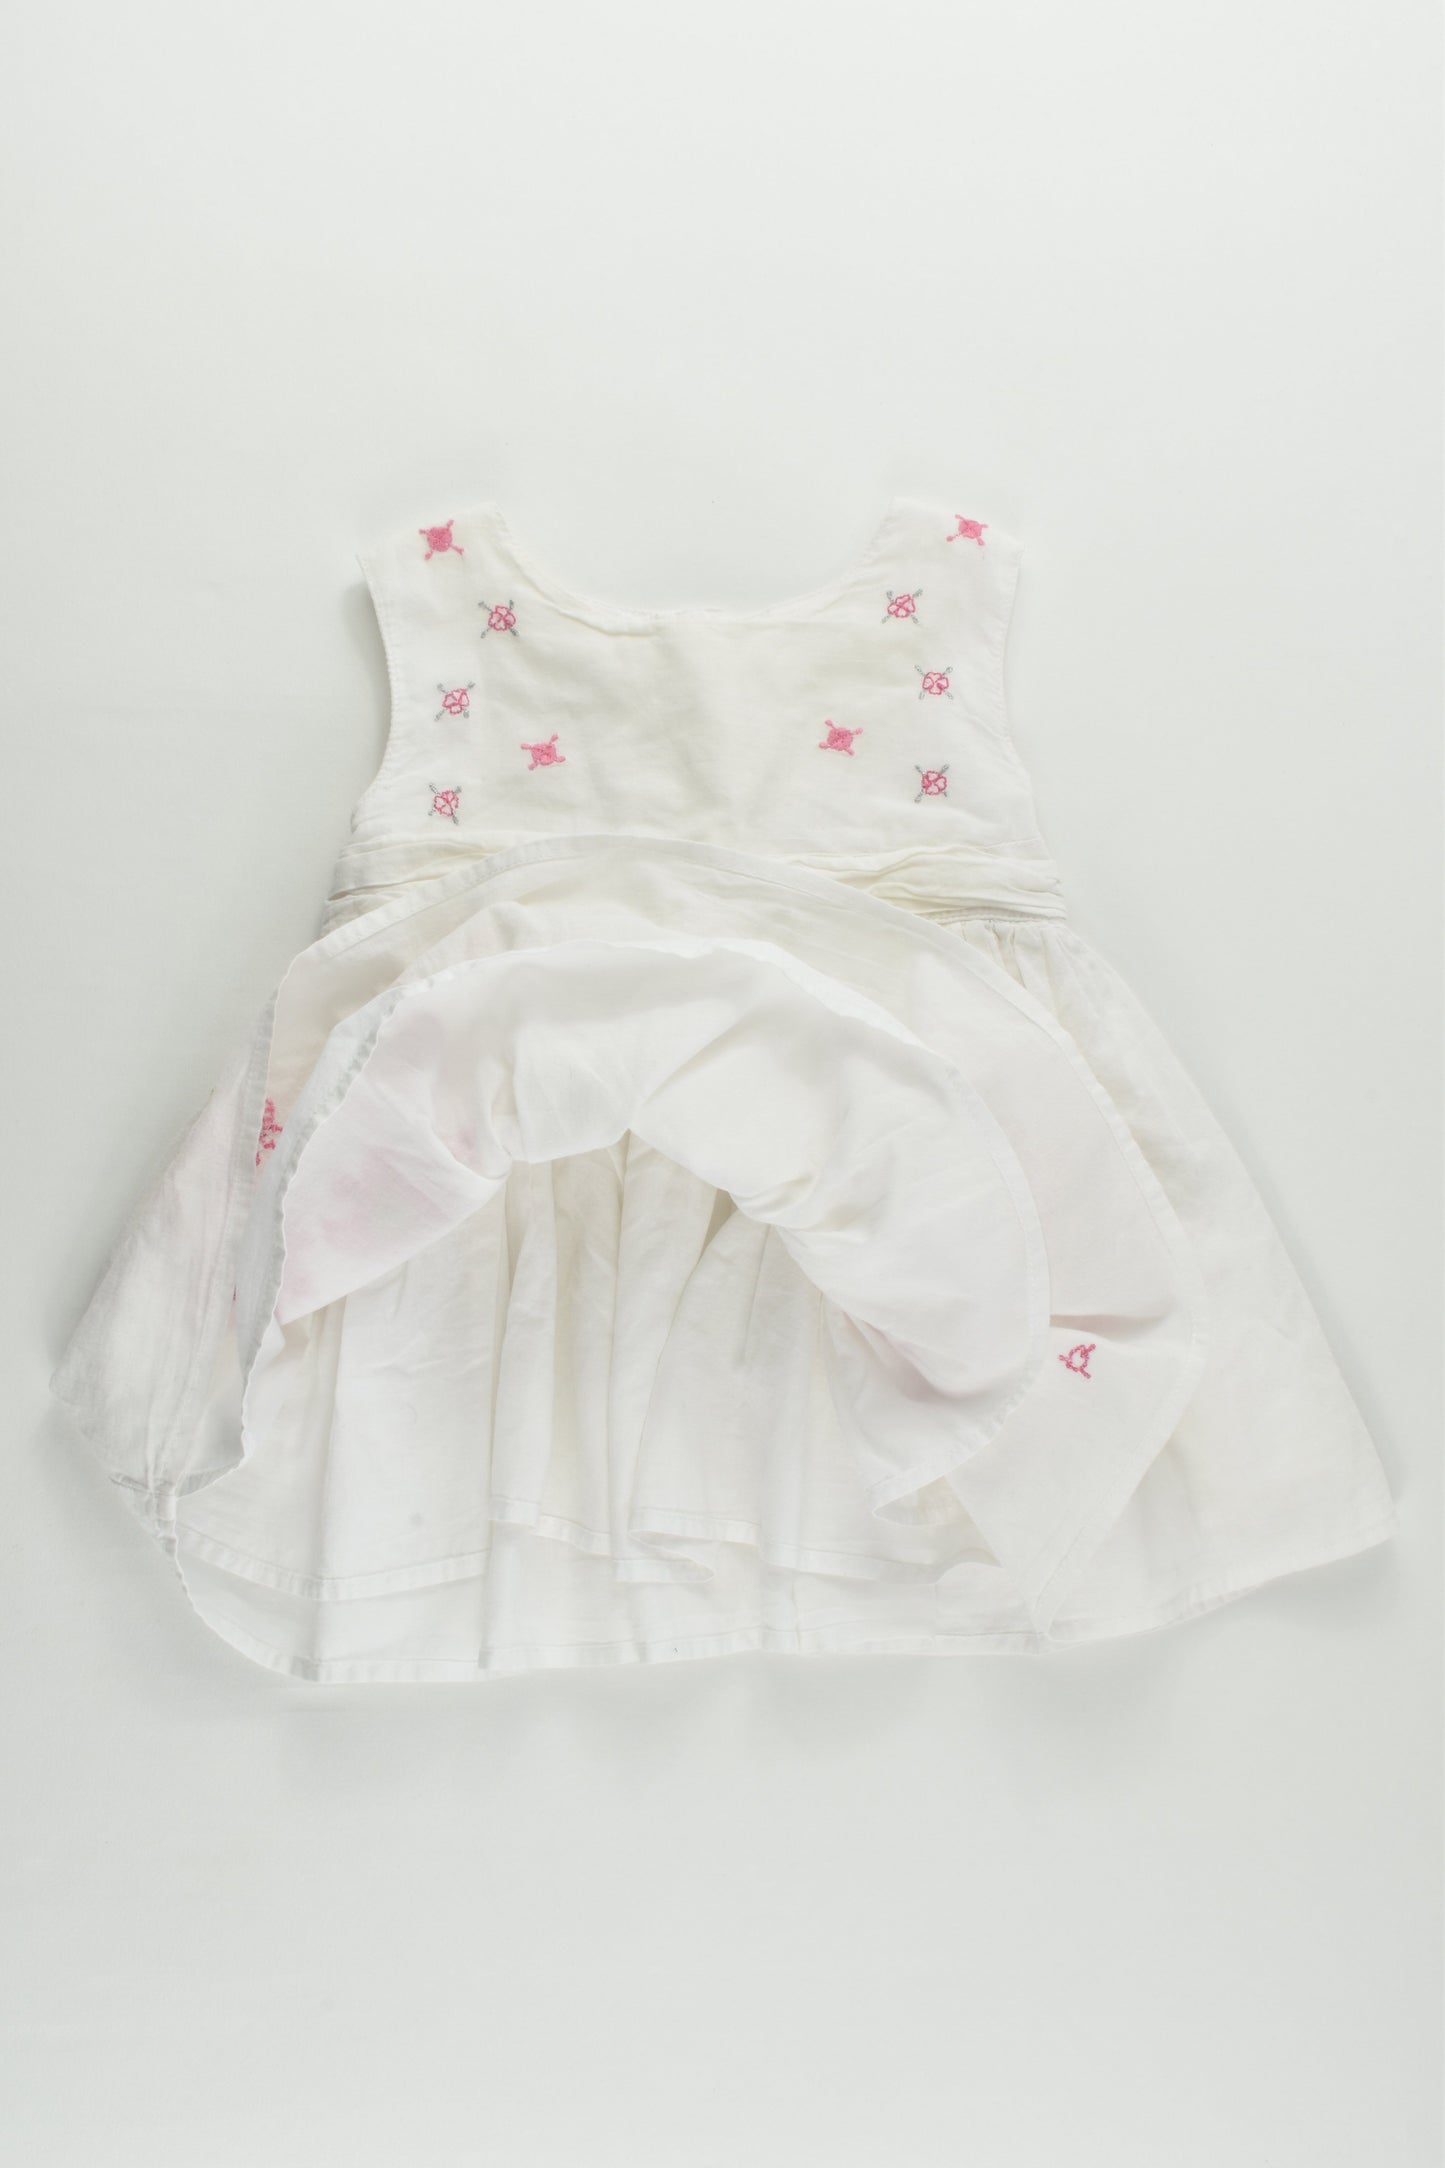 George Size 00 (3-6 months) Lined Dress